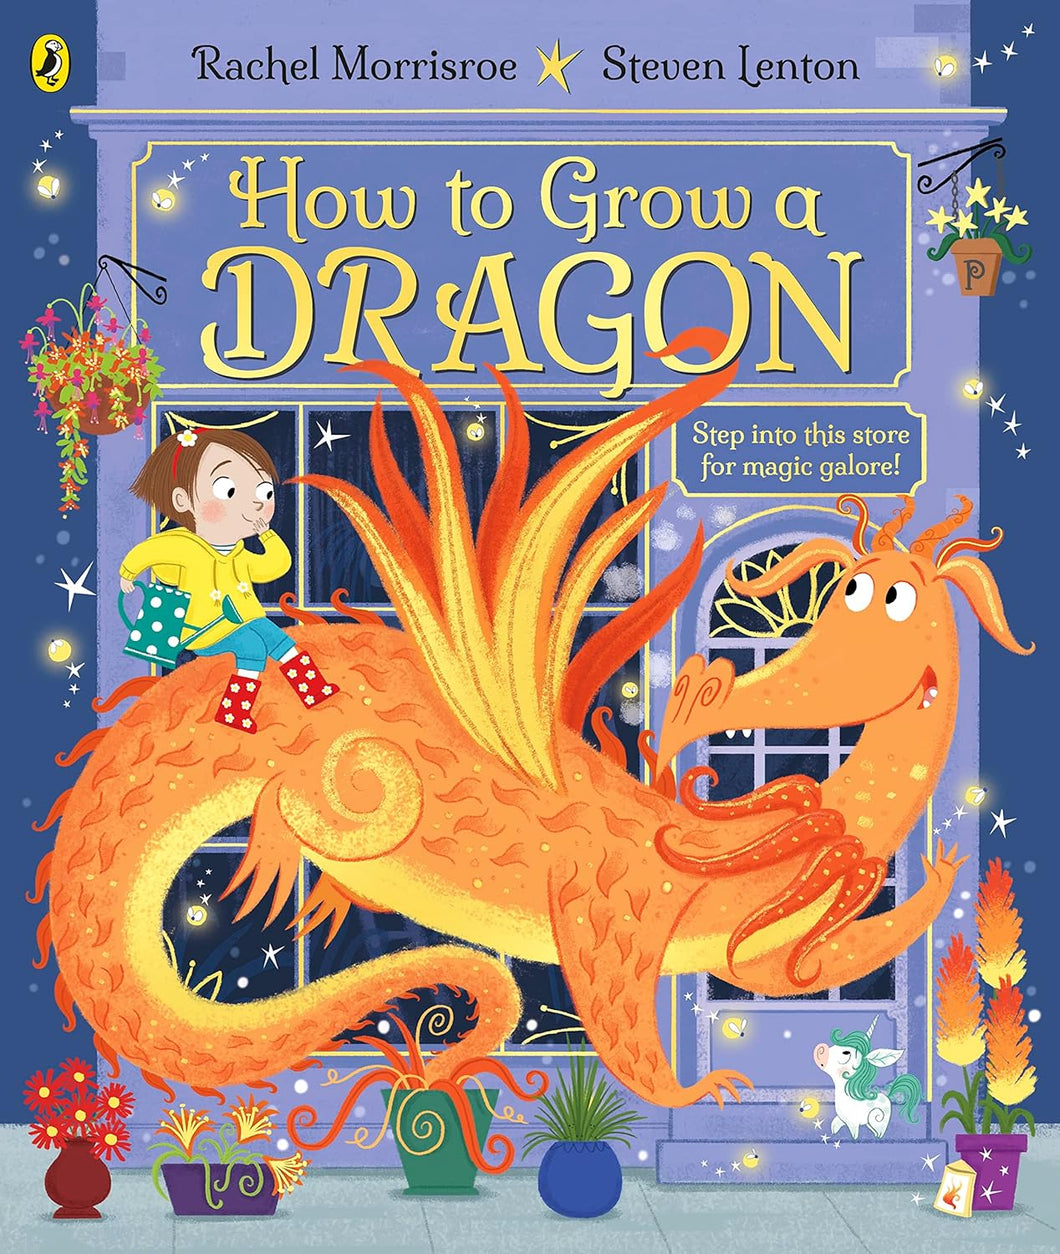 How to Grow a Dragon